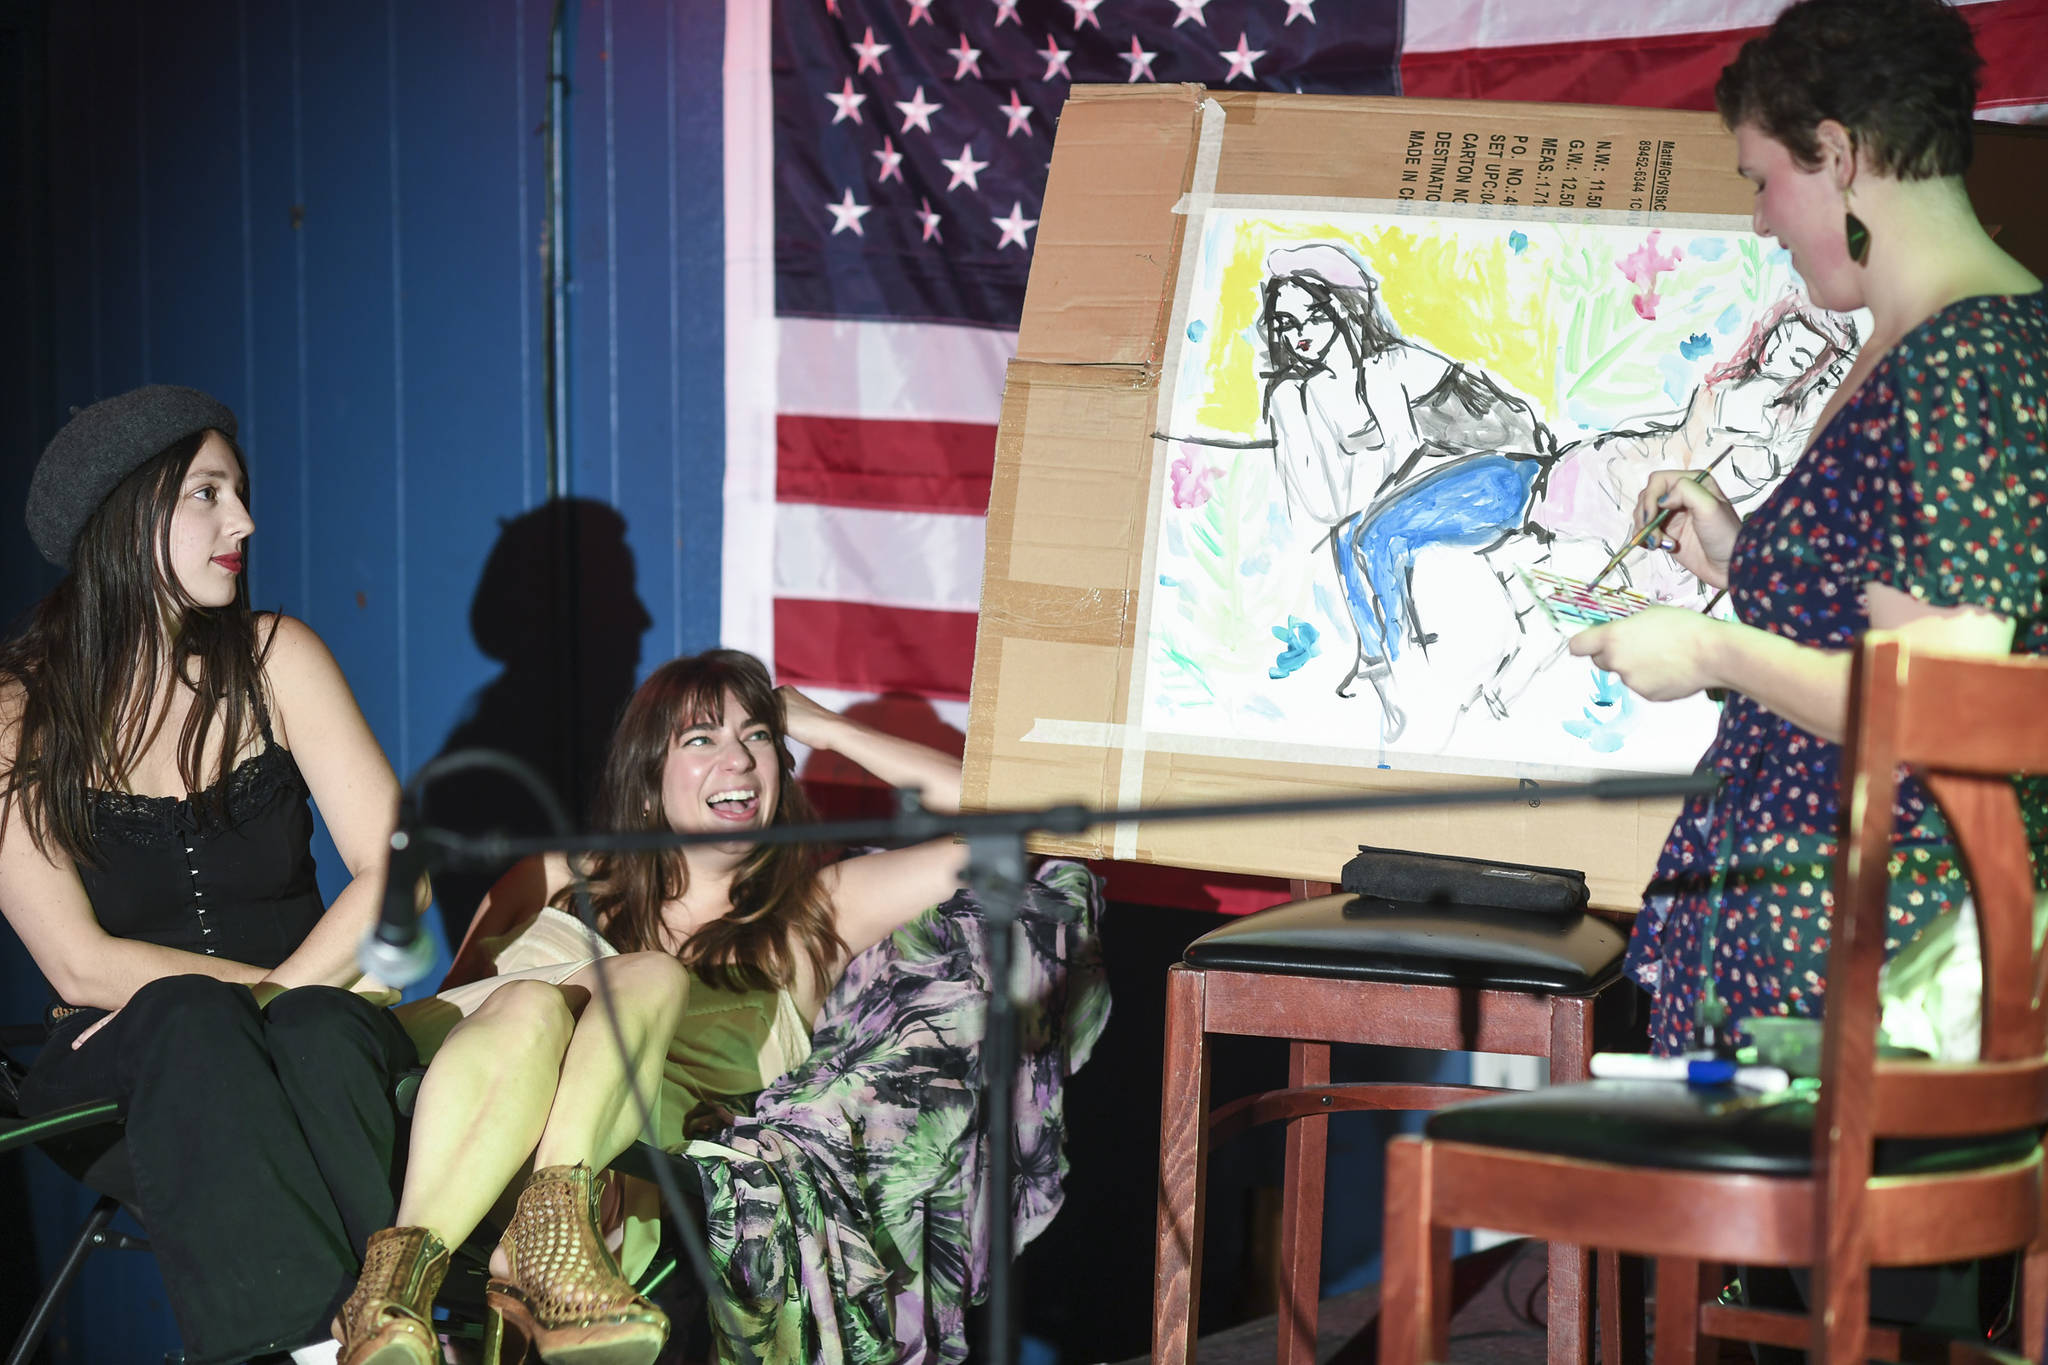 Natalie Weinberg, right, performs with a live model painting of Dana Herndon, center, and Serena Drazkowski during the GRLZ open mic night at the The Rendezvous Bar in August 2019. After some time off, the event is returning, but now at the Hangar Ballroom. (Michael Penn | Juneau Empire File)